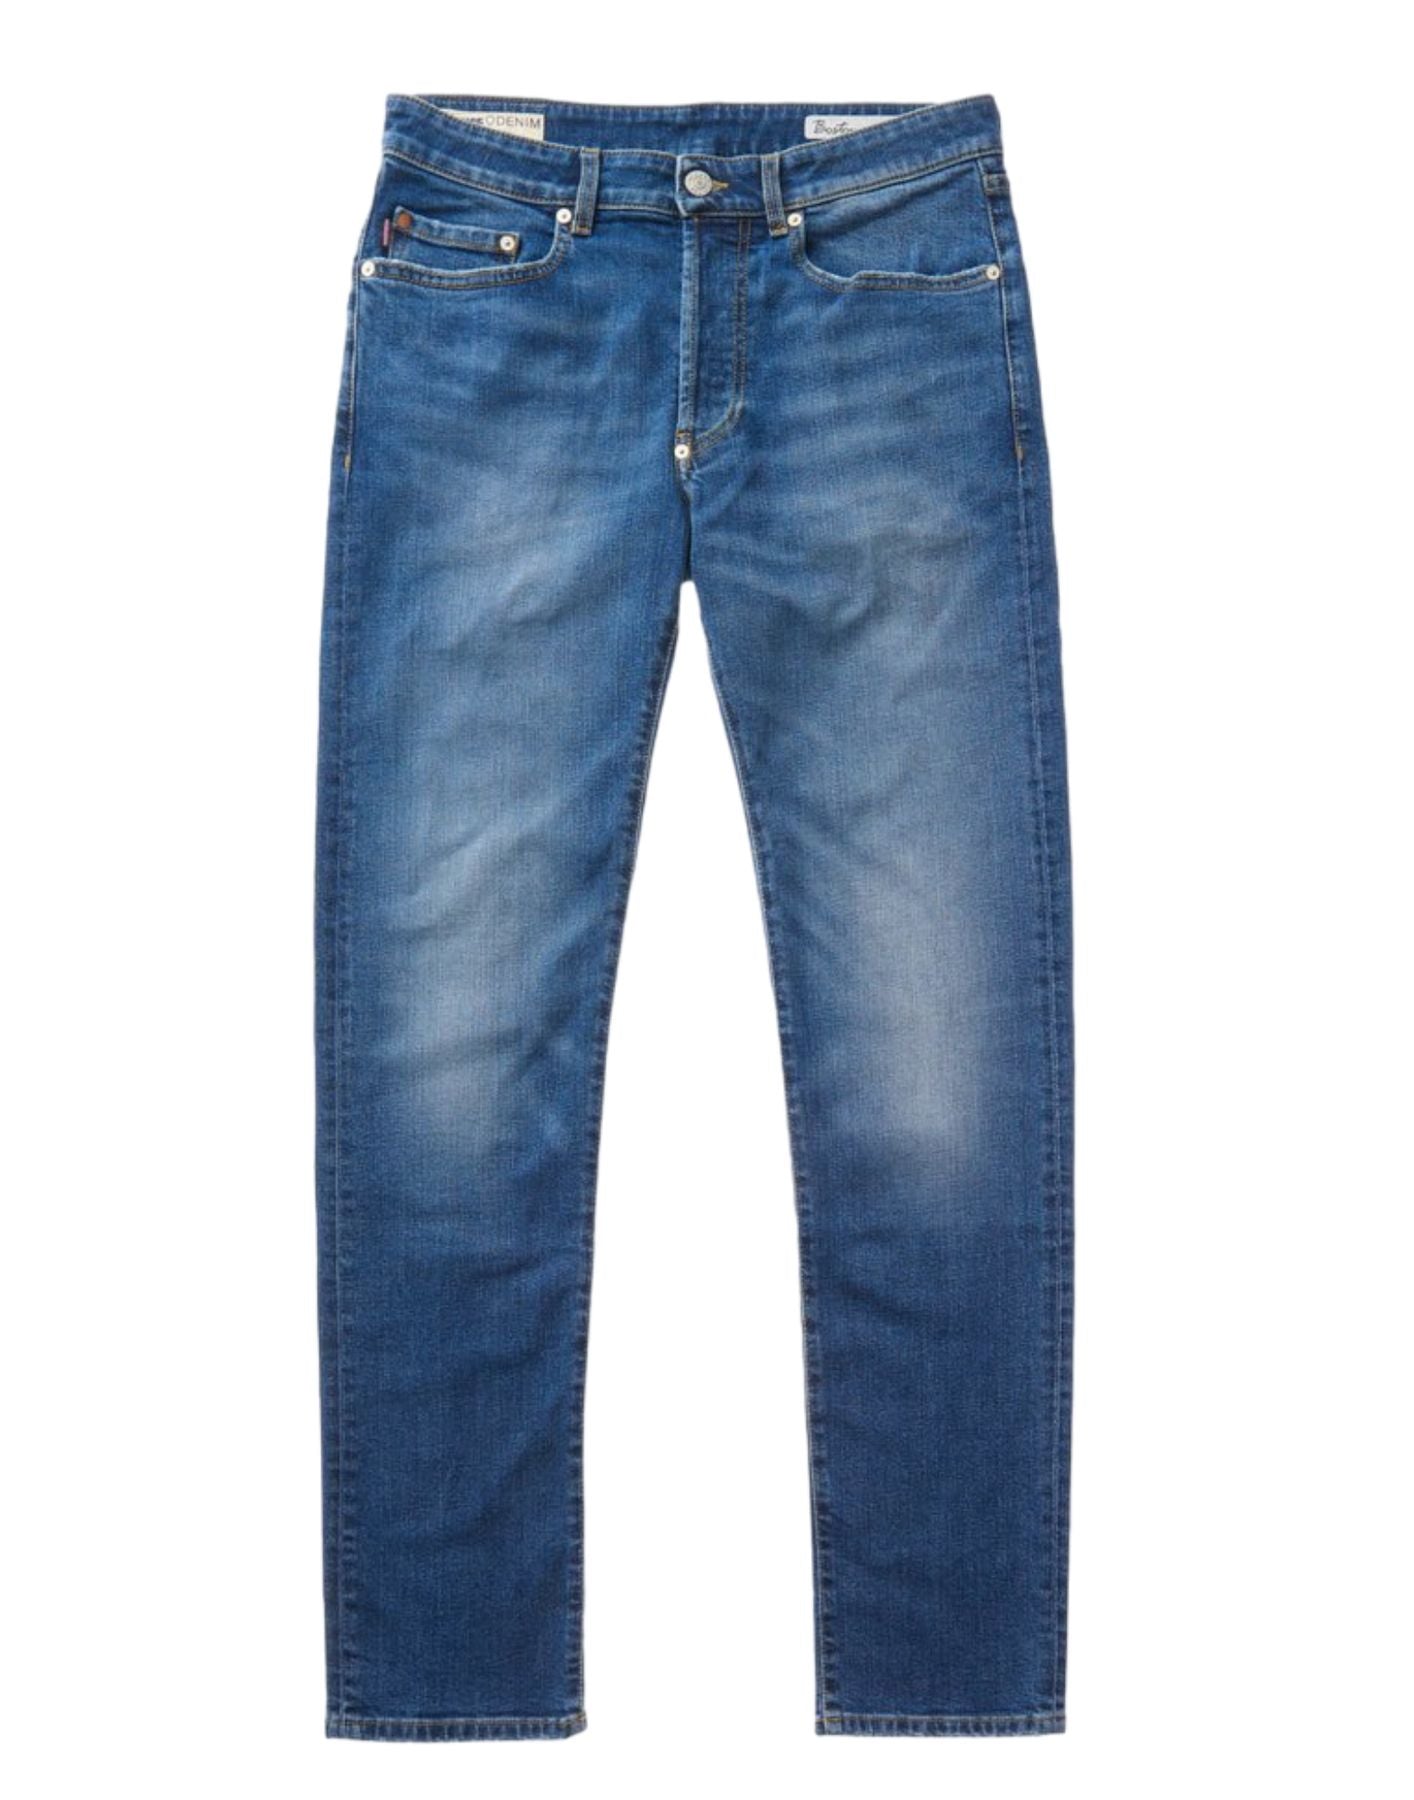 Jeans for man 24SBLUP03481 006873 D149 Blauer